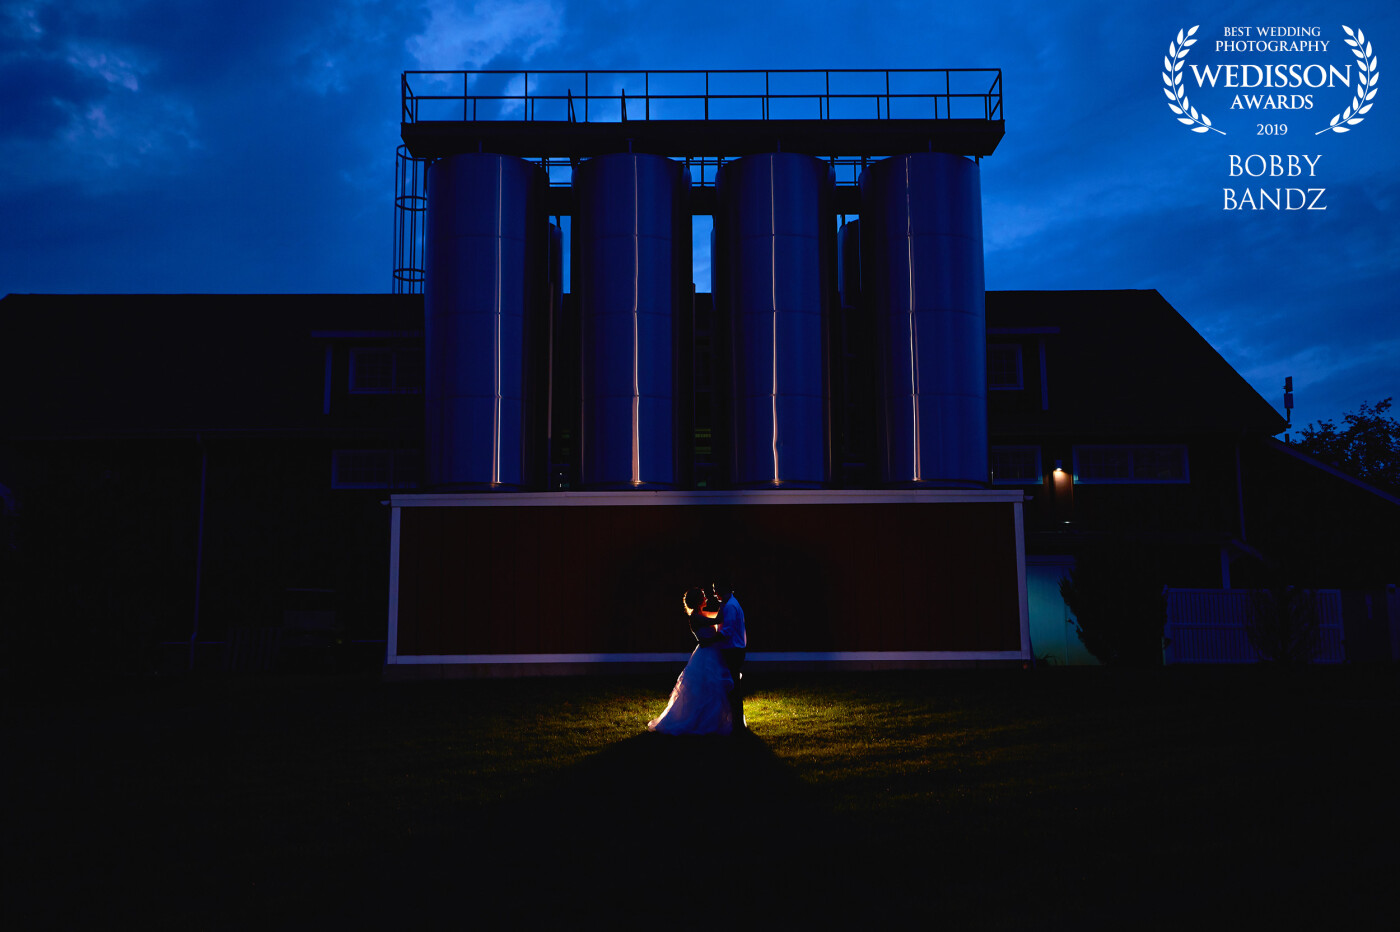 The bride was down to climb up to the top of the silo but couldn’t fit her dress through the opening so we went to the next best thing...a wide shot to show the entire landscape! Boom! Crushed it!